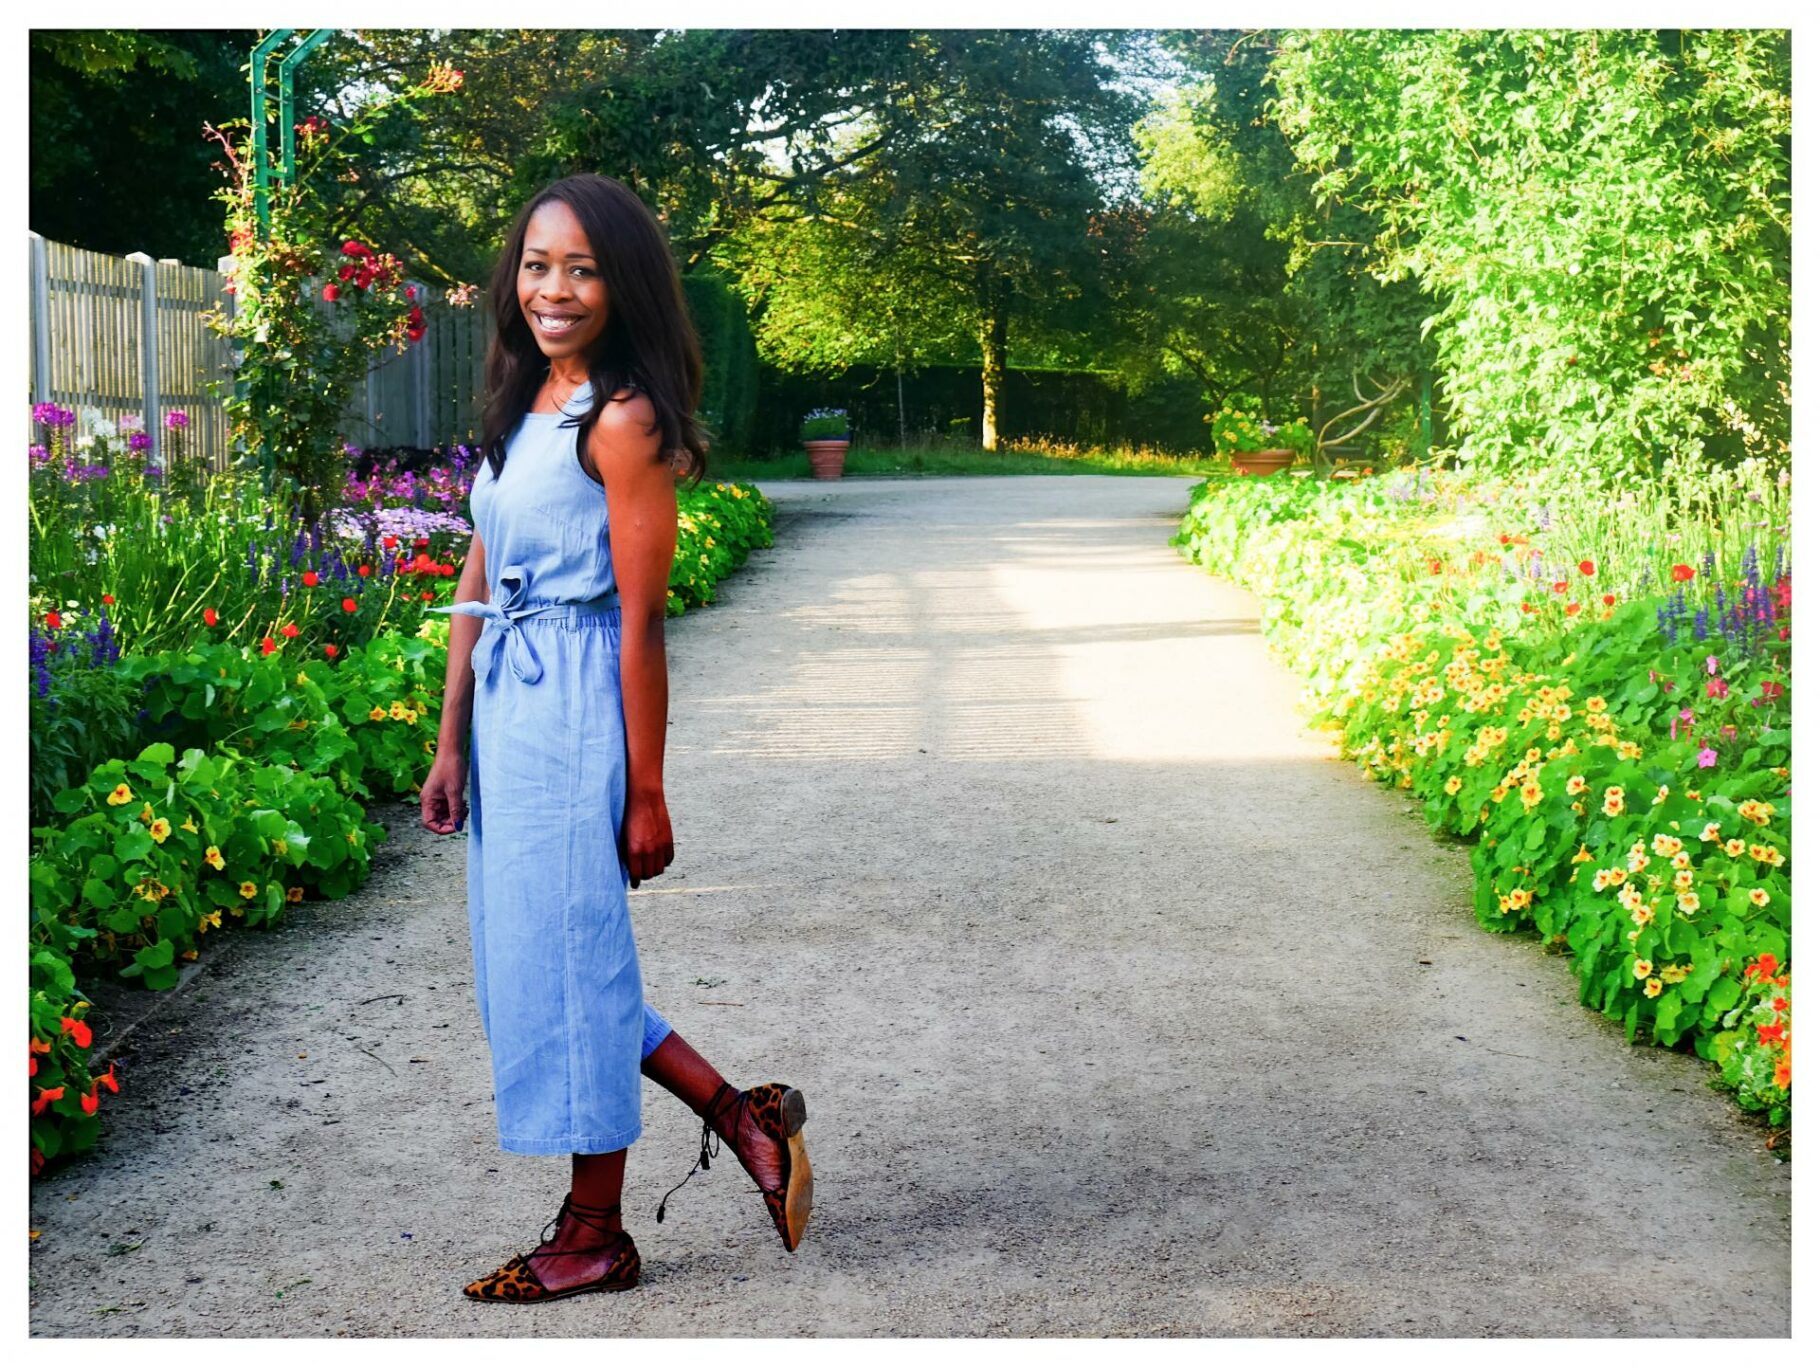 M&S Kids Pinafore Jumpsuit at the Monet Gardens | Style Watch